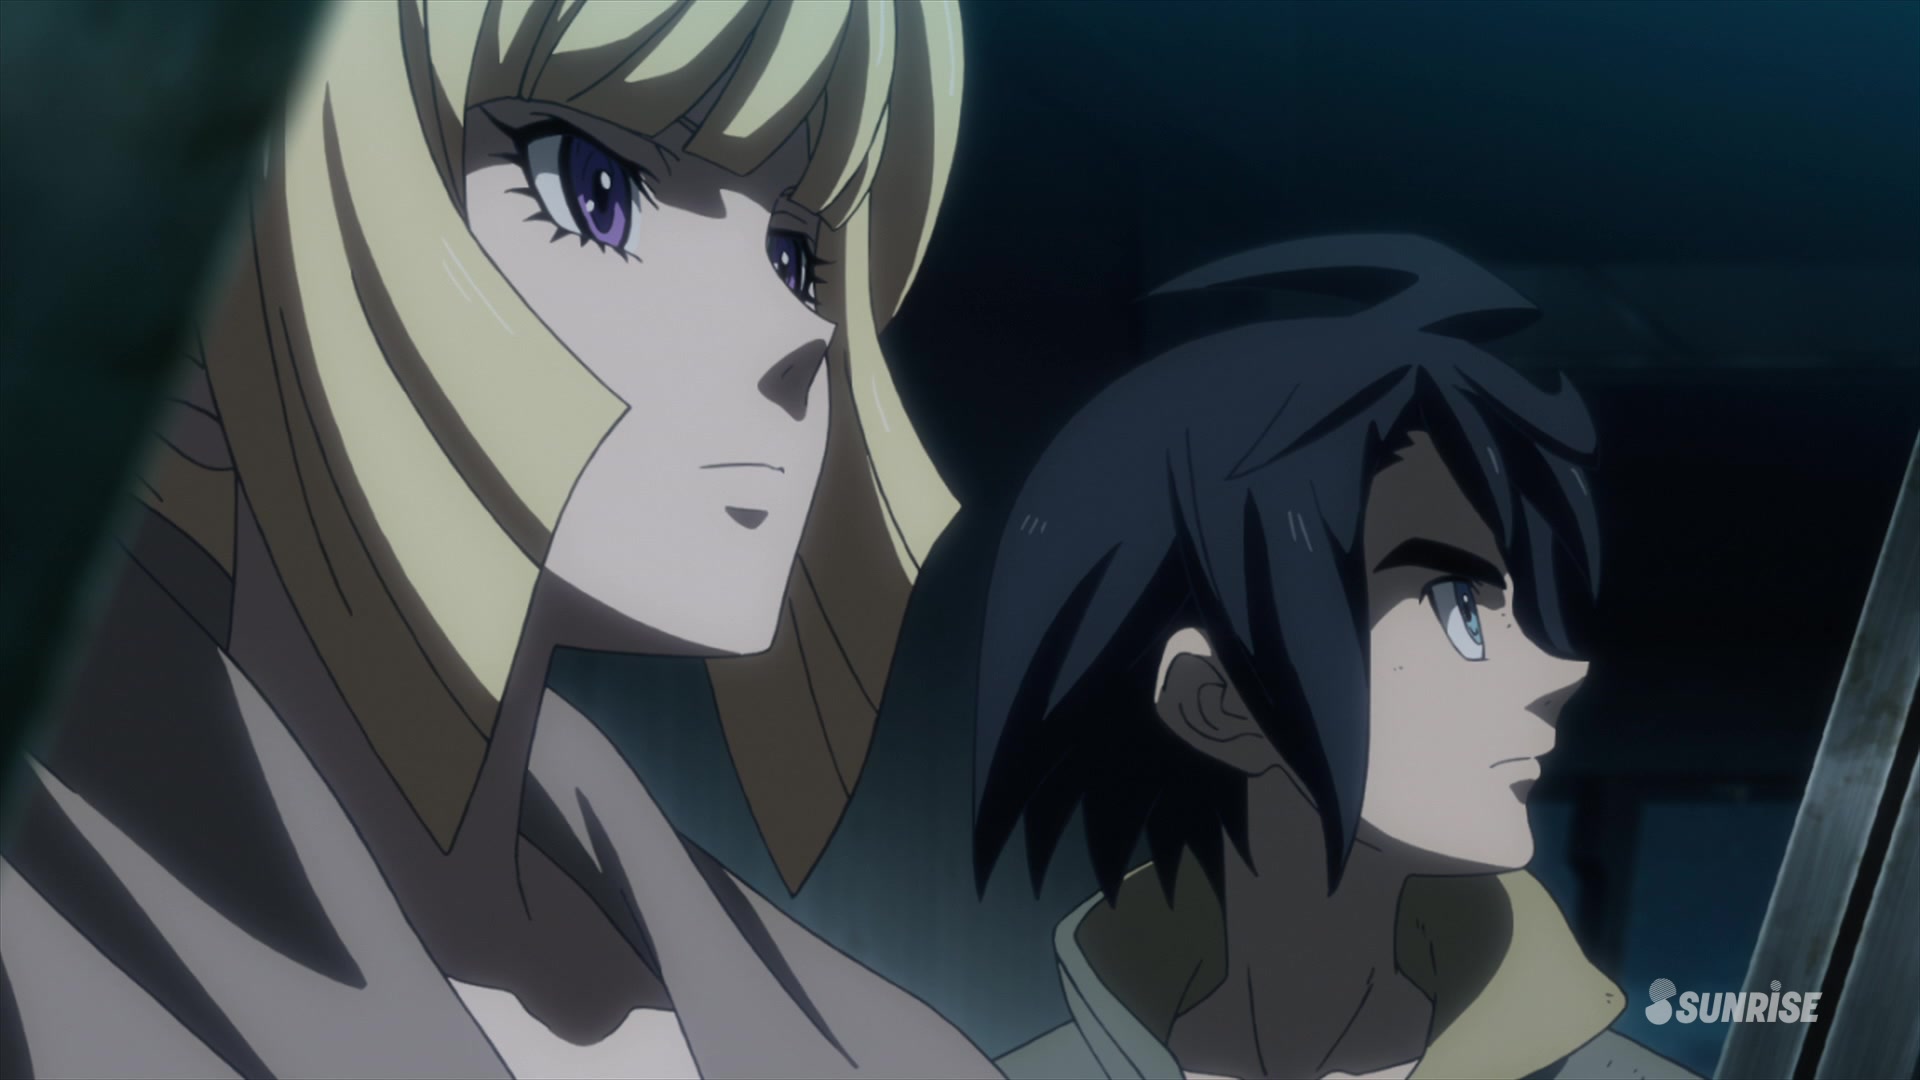 Mobile Suit Gundam Iron Blooded Orphans Episode 5 Beyond The Red Sky Watch On Crunchyroll